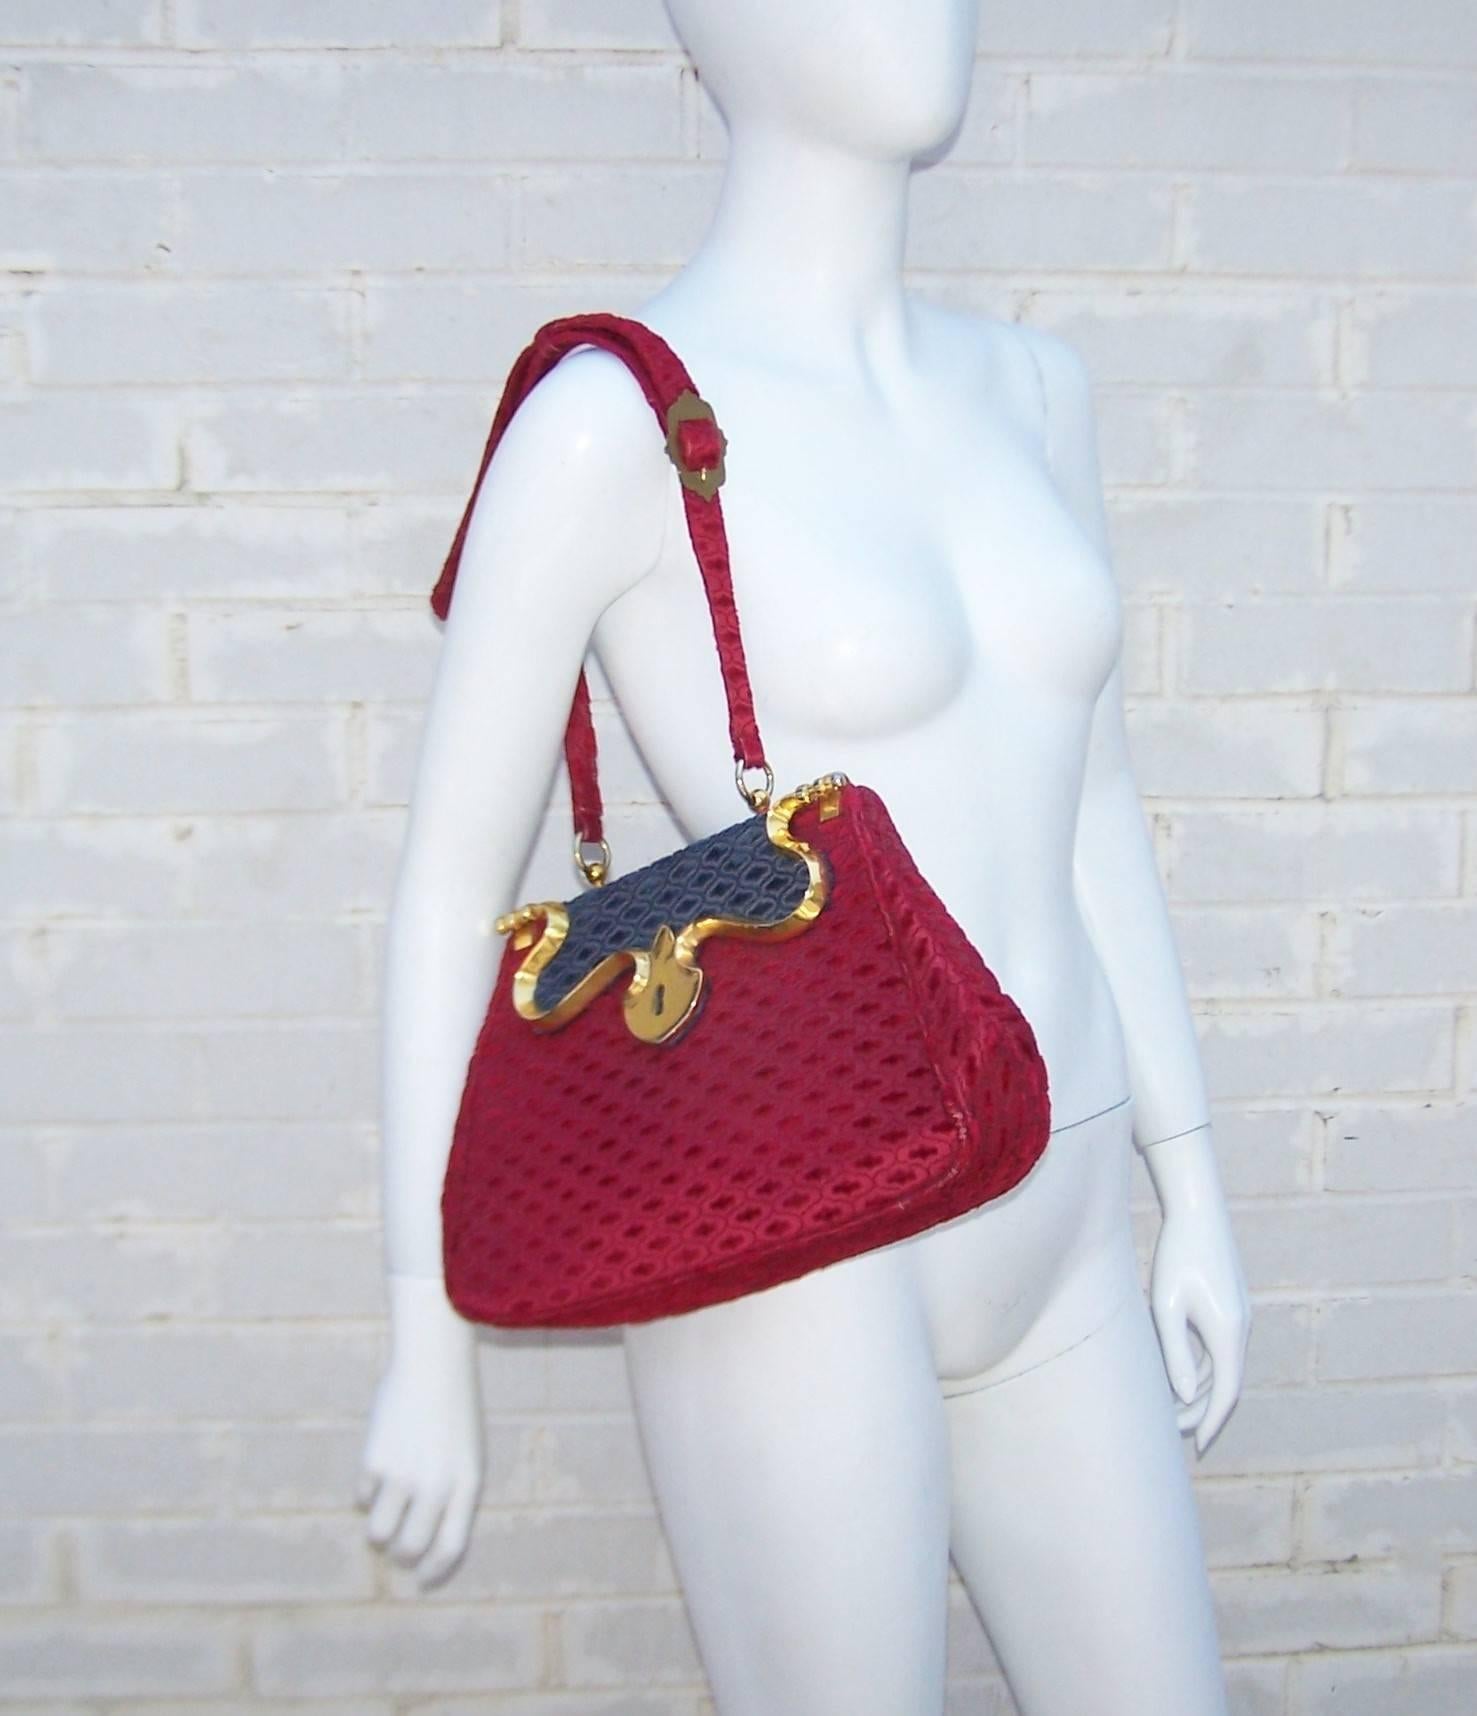 We are big fans of Roberta Di Camerino's handbags ... each one is like a precious tactile treasure.  This 1950's design for Saks Fifth Avenue has a carpetbag sensibility in a wonderful ruby red and navy blue cut velvet.  As if the rich color